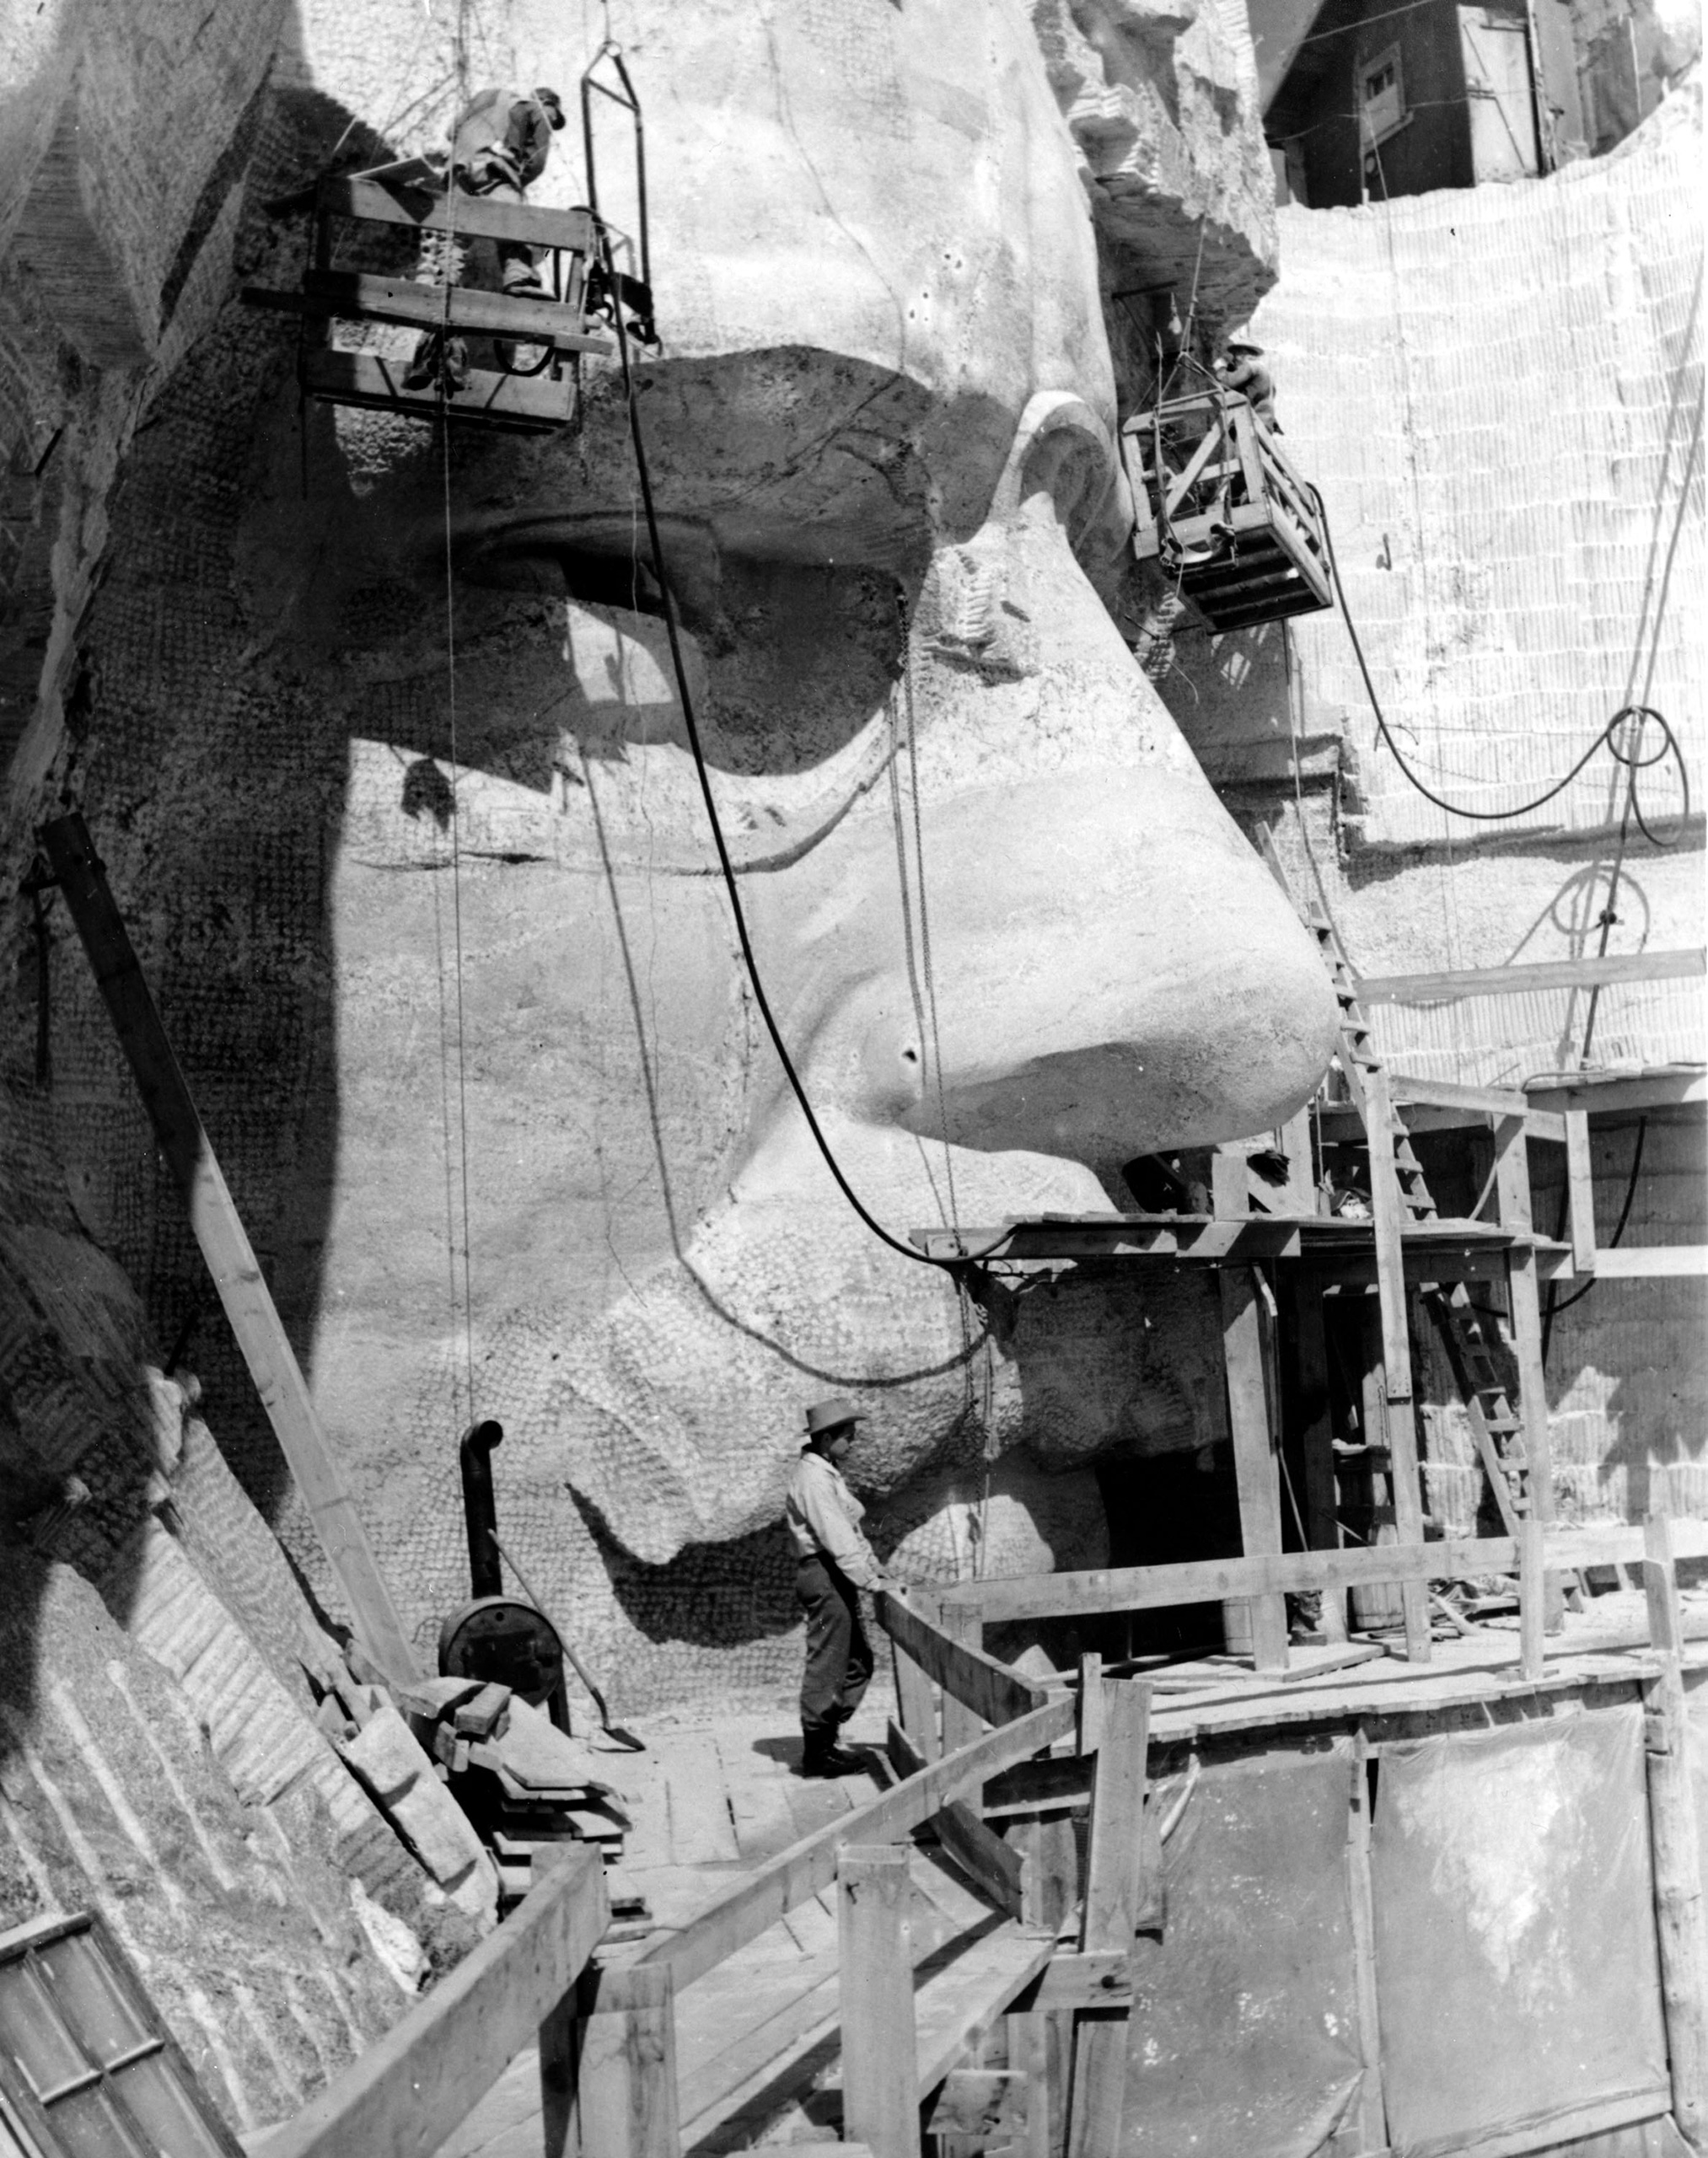 Sculptor Lincoln Borglum on the scaffold below the stone face of U.S. President Theodore Roosevelt on the Mount Rushmore Memorial in April 1944.